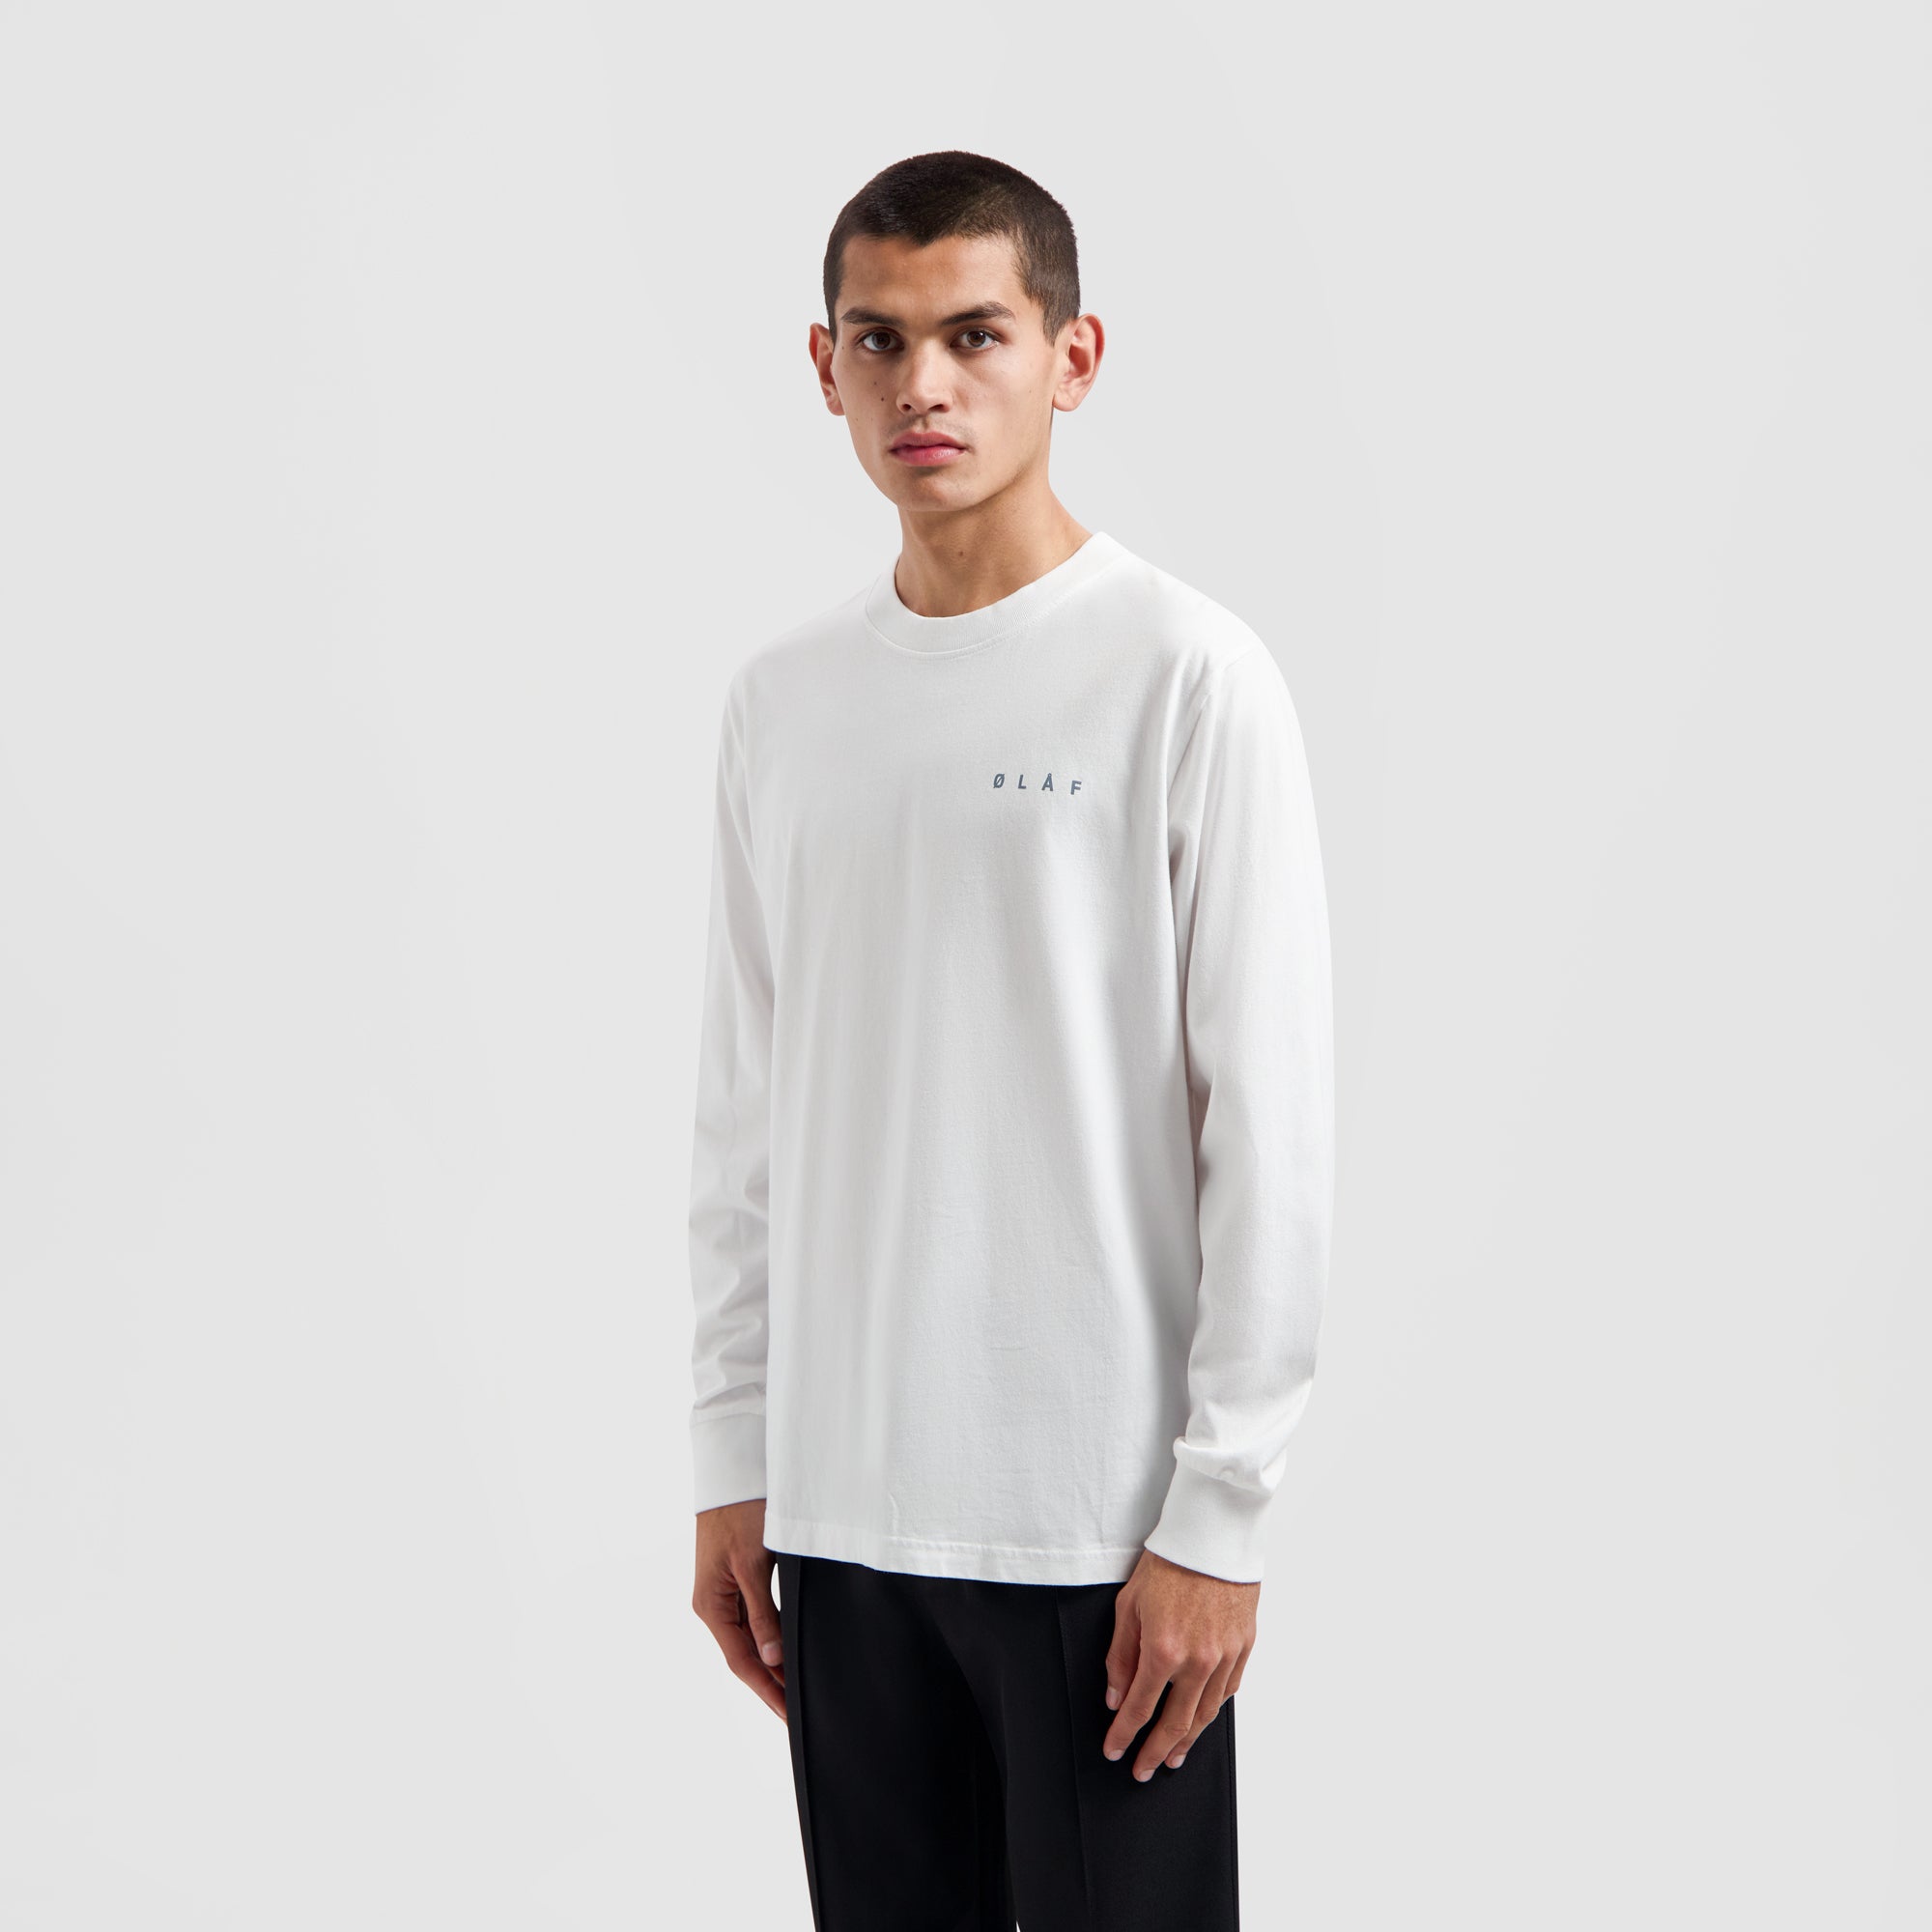 Pixelated Face LS Tee - Optical White